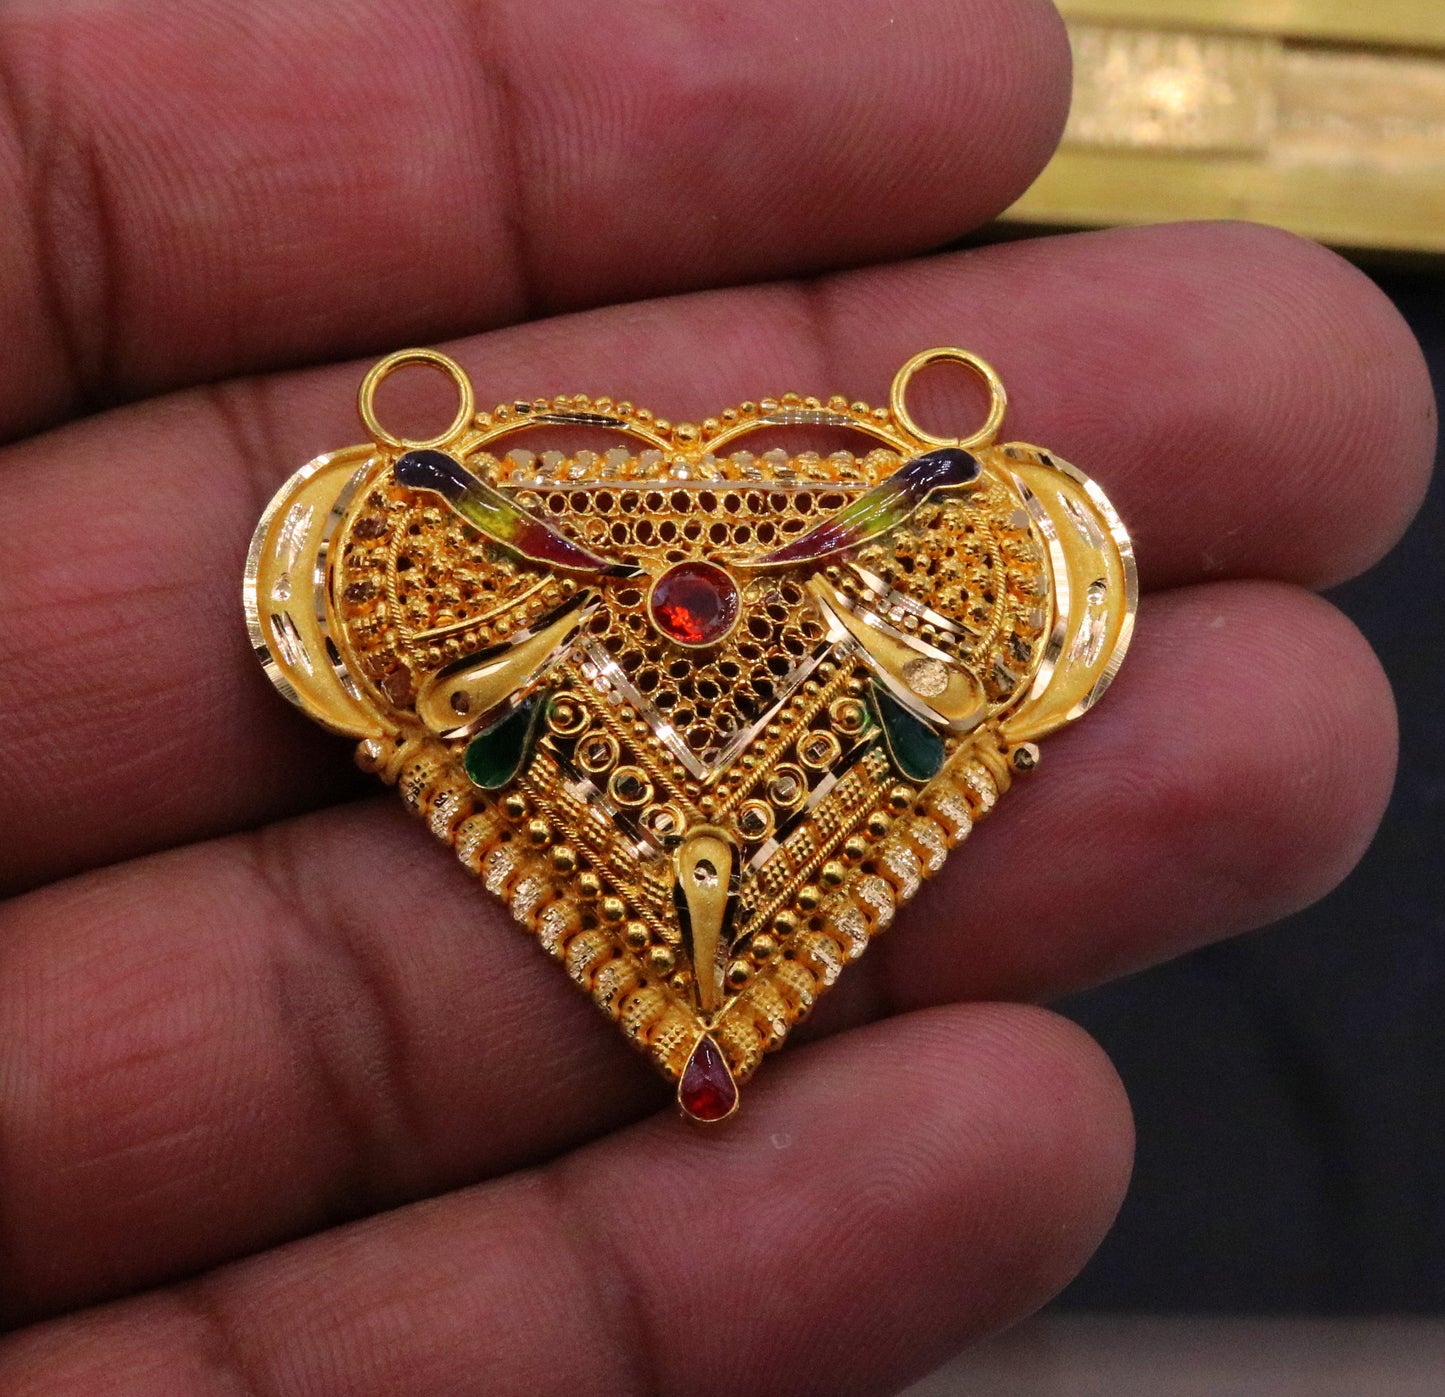 Vintage design Genuine certified 22kt yellow gold filigree work meenakari pendant necklace traditional art of indian tribal jewelry gp13 - TRIBAL ORNAMENTS